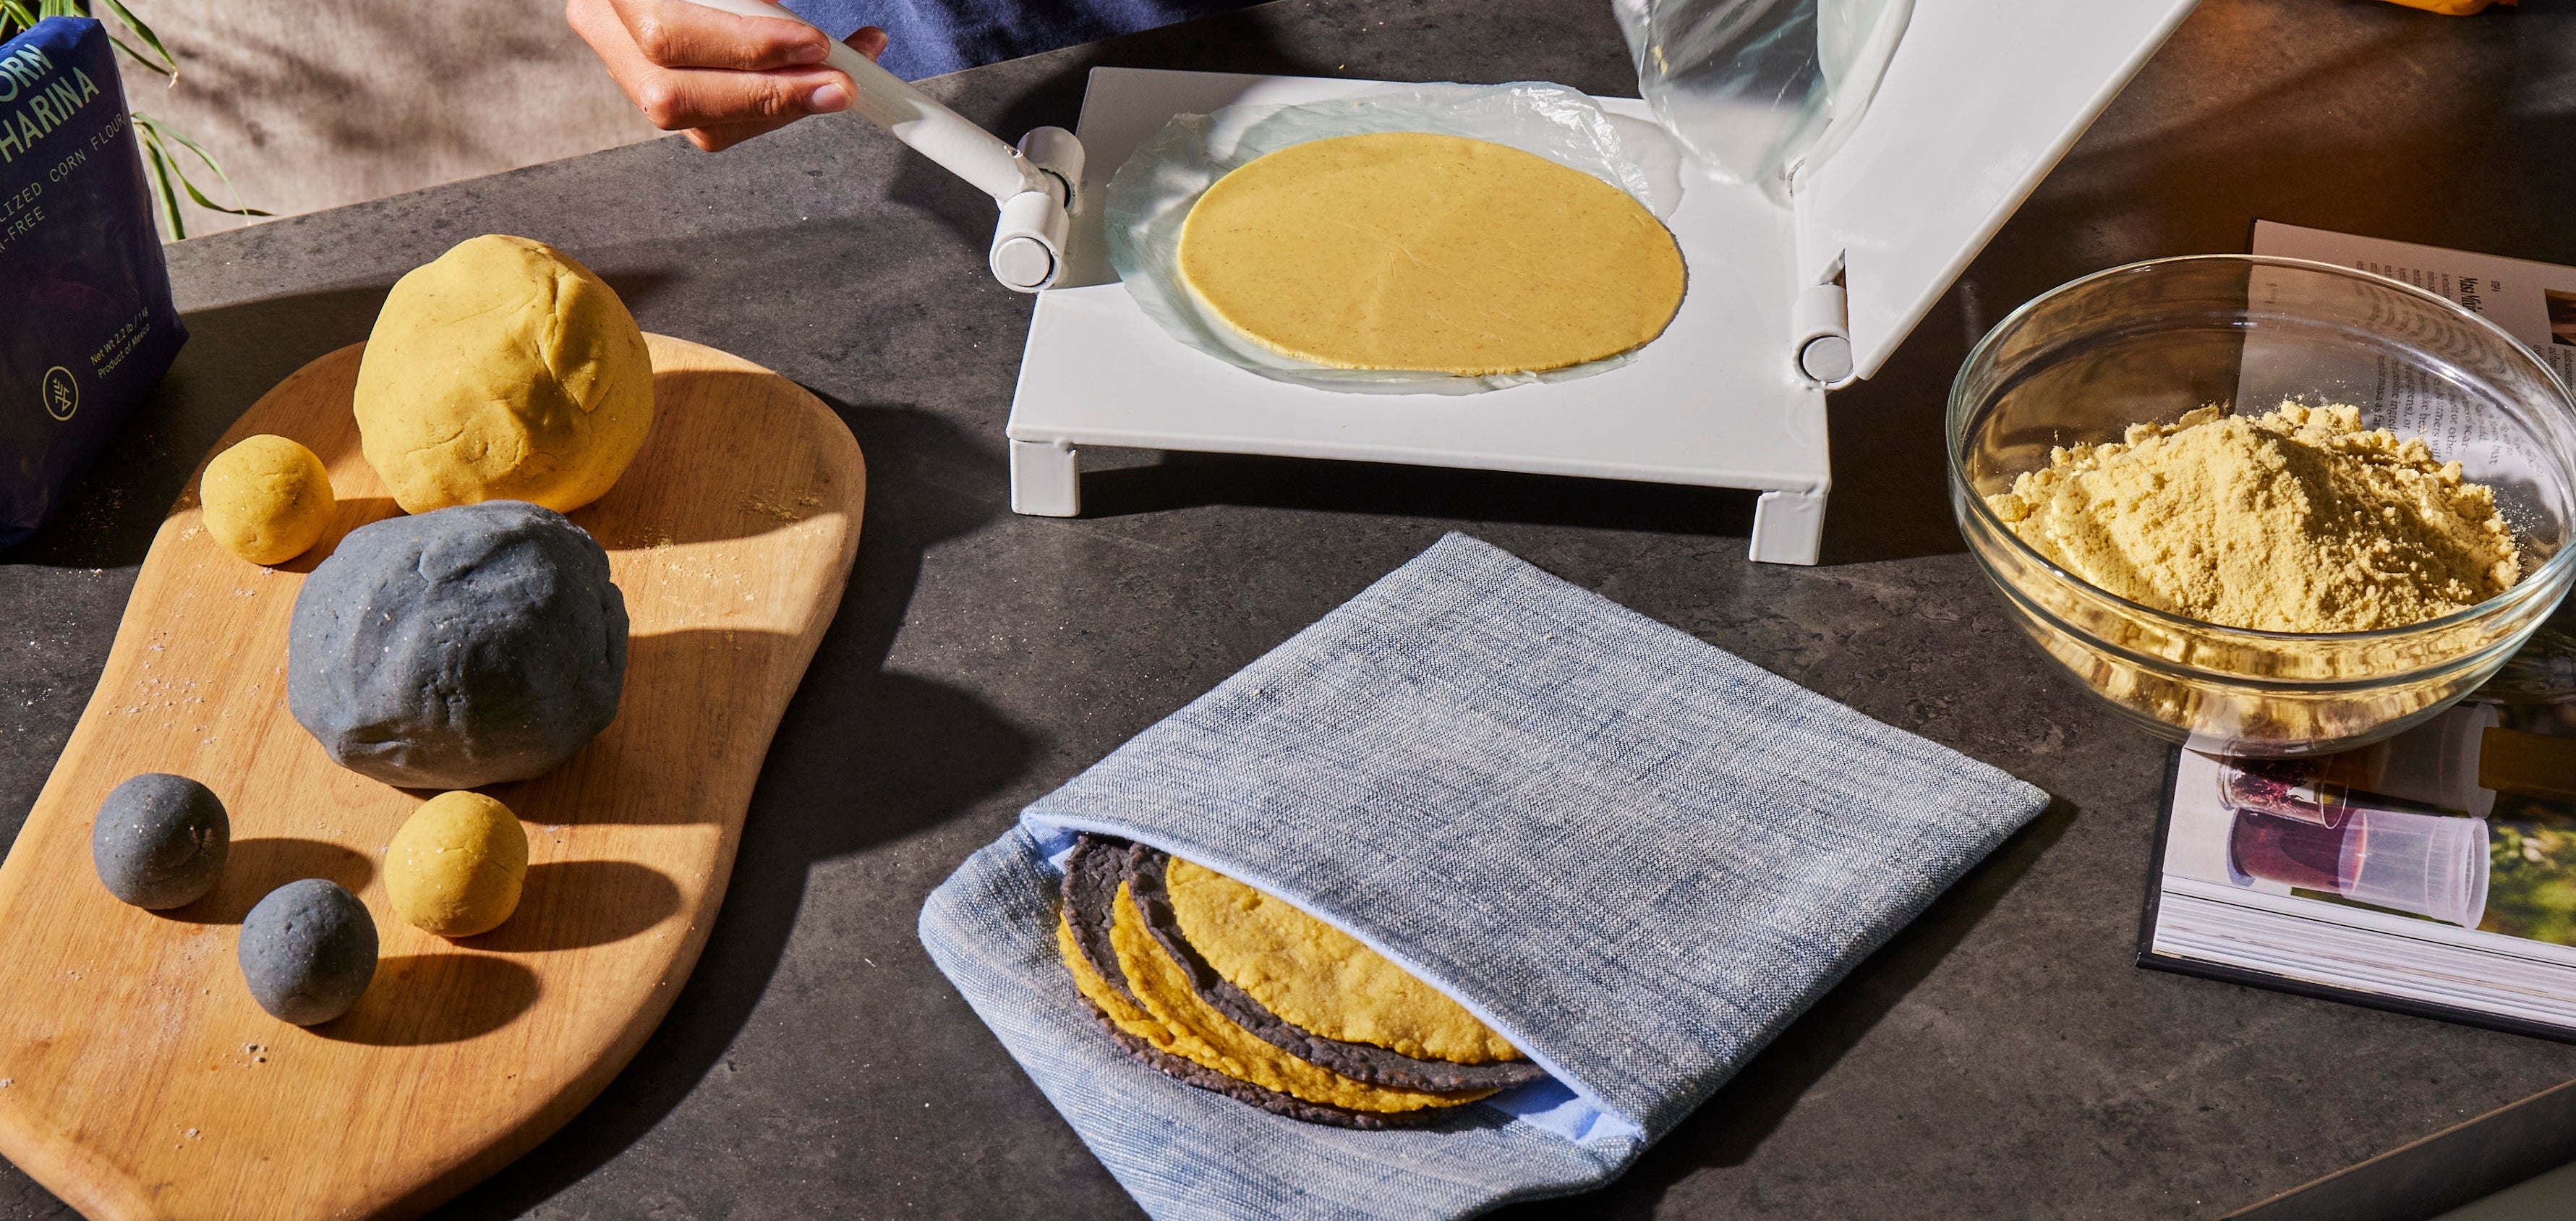 The Top Tortilla Warmers for 2023